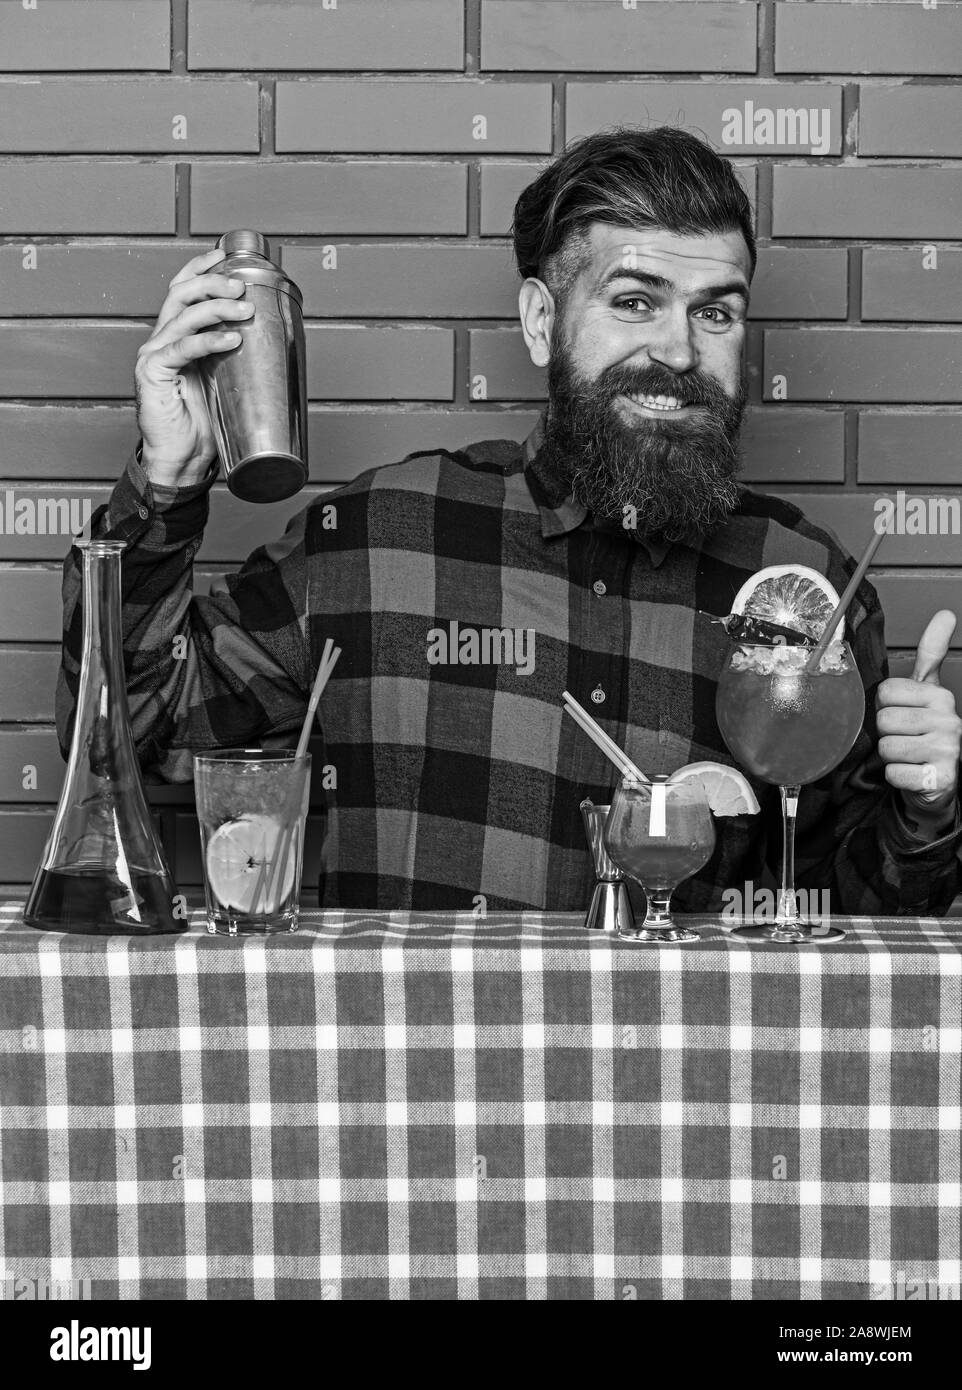 Alcoholic drinks concept. Man in checkered shirt on brick wall background prepares drinks. Barman with long beard and mustache and stylish hair on happy face holding shaker, makes alcoholic cocktail. Stock Photo